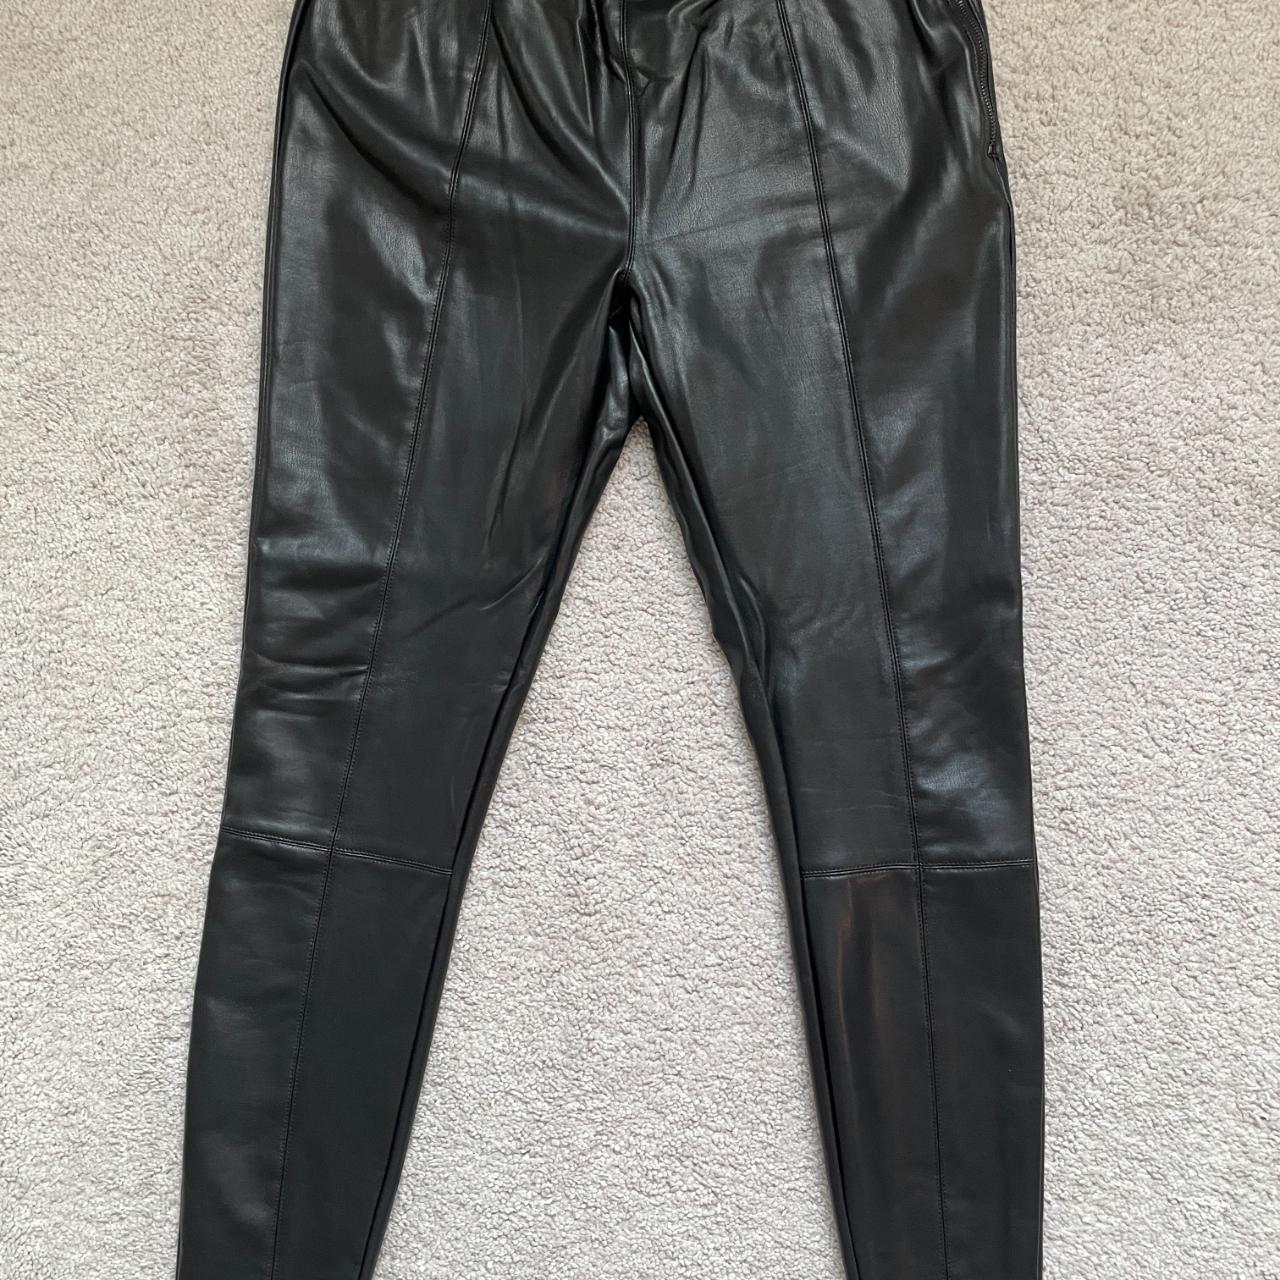 Topshop tall leather pants - Depop